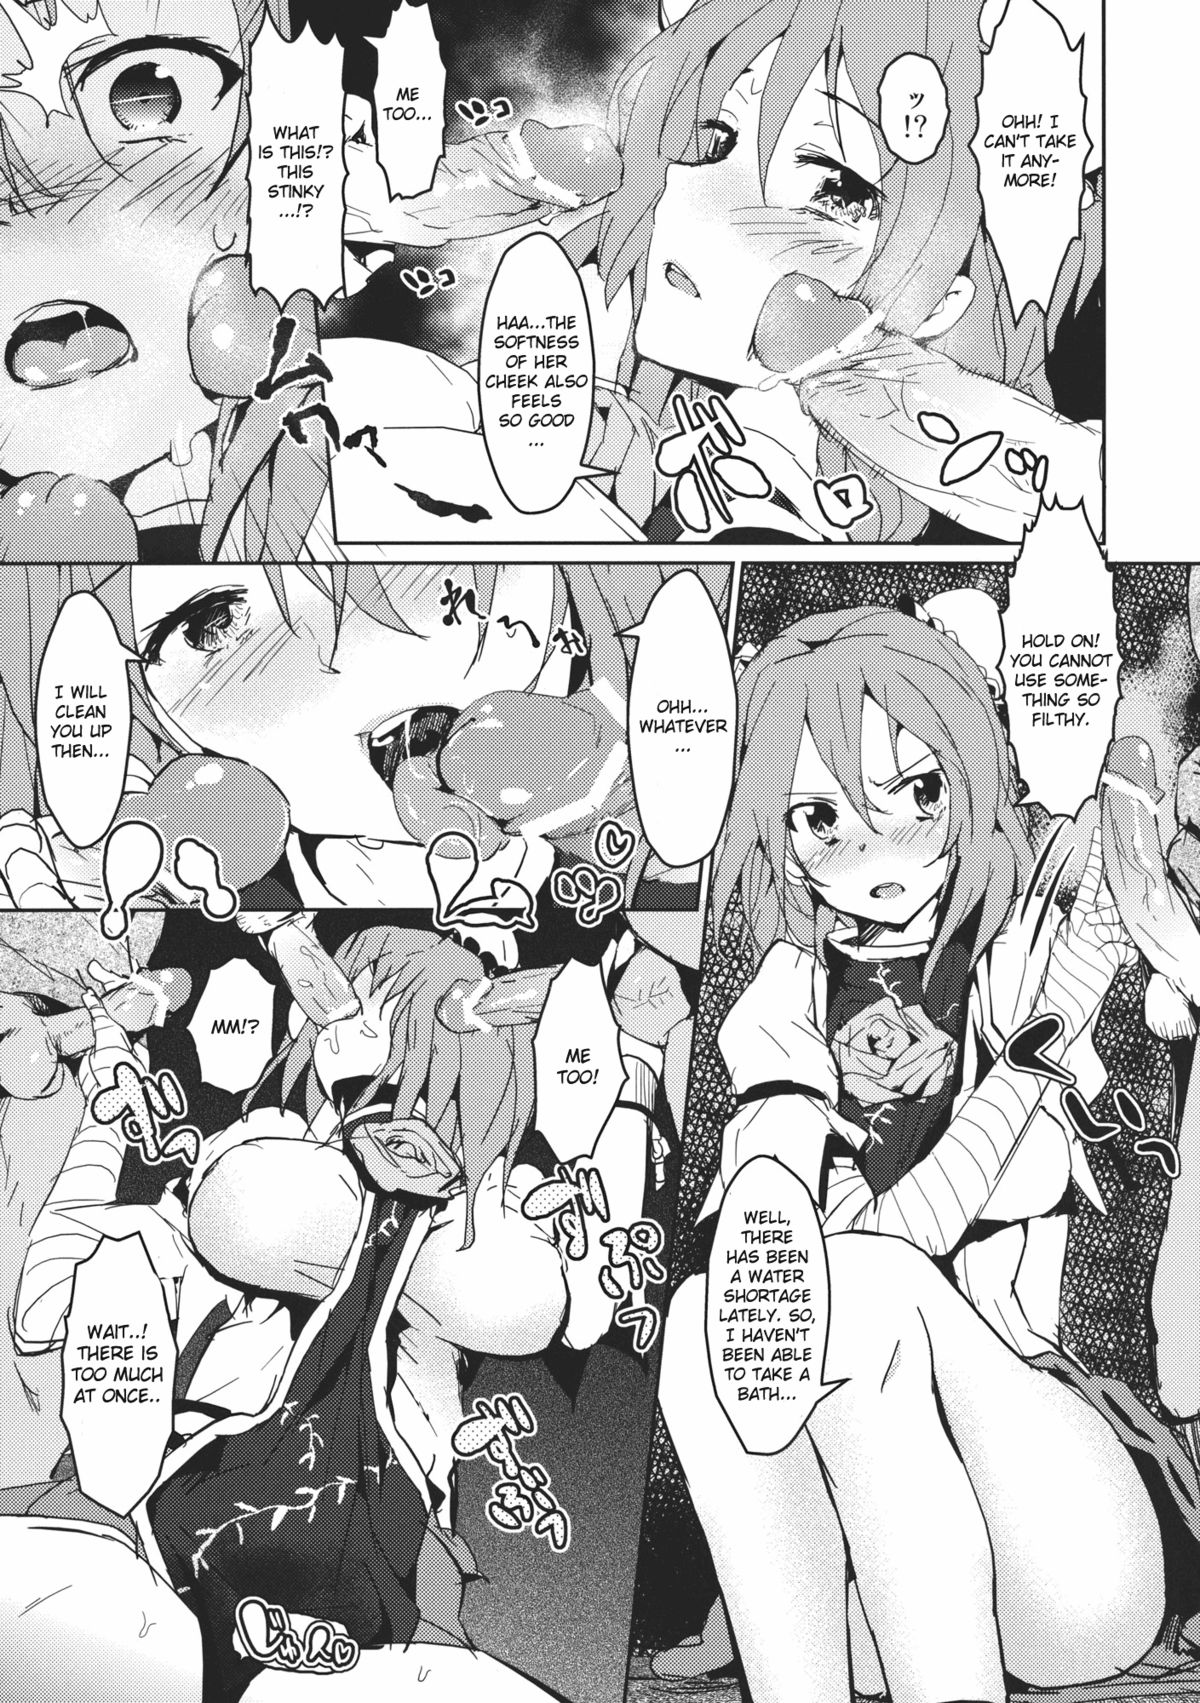 (C80) [Galley (ryoma)] Kasen-chan no Usui Hon (Touhou Project) [English] (C80) [Galley (ryoma)] 華扇ちゃんの薄い本 (東方Project) [英訳]